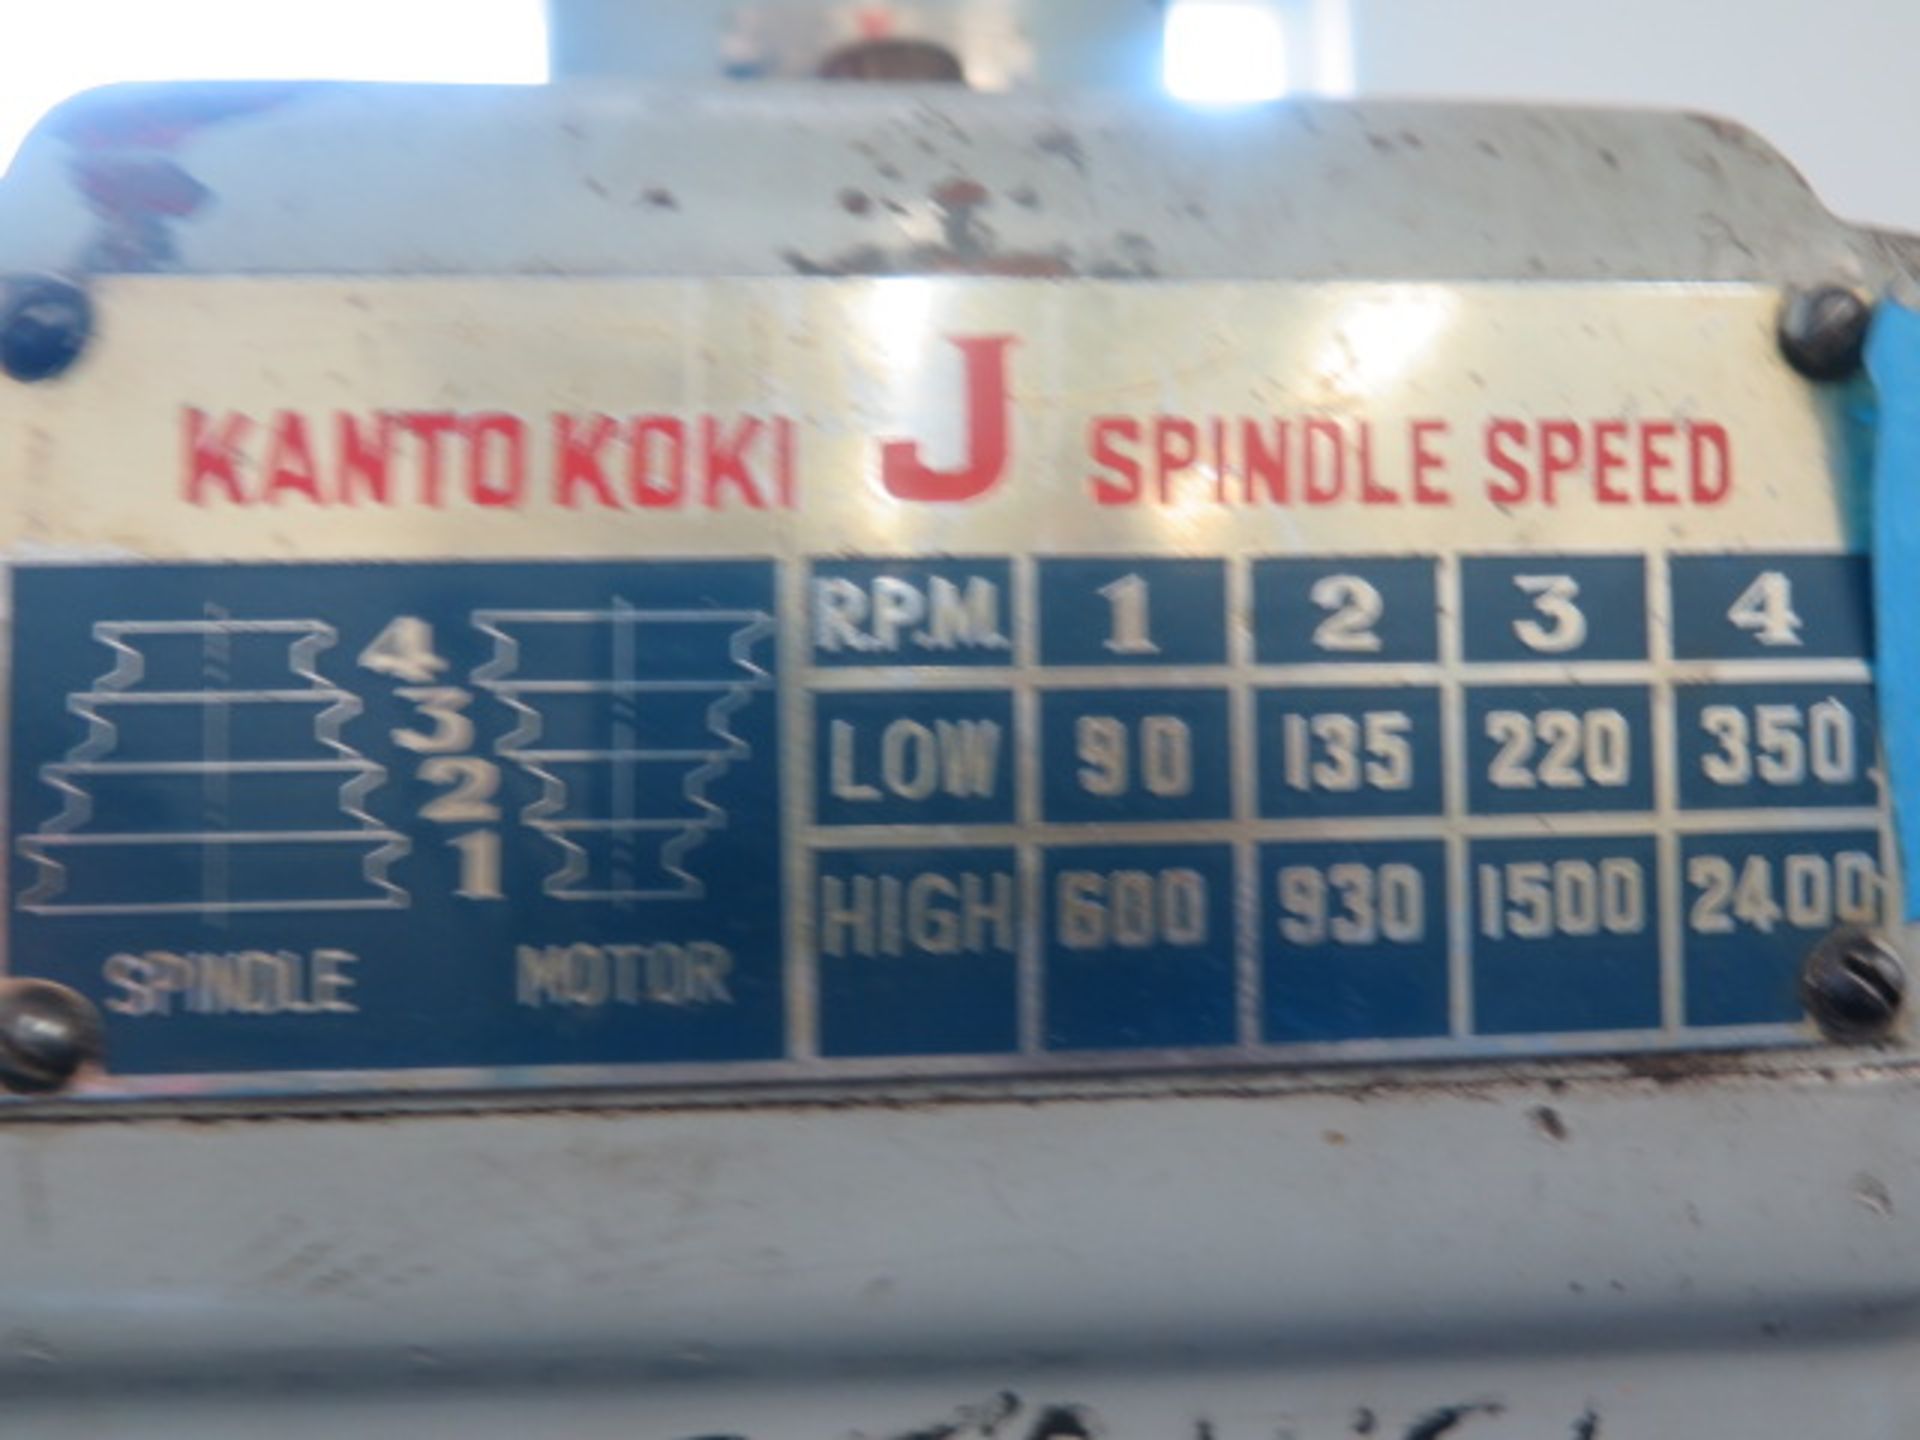 Kanto Koki “J-Spindle” Vertical Mill w/ 90-2400 RPM, 8-Speeds, Box Ways, 4” Riser, 9” x 42” Table - Image 5 of 5